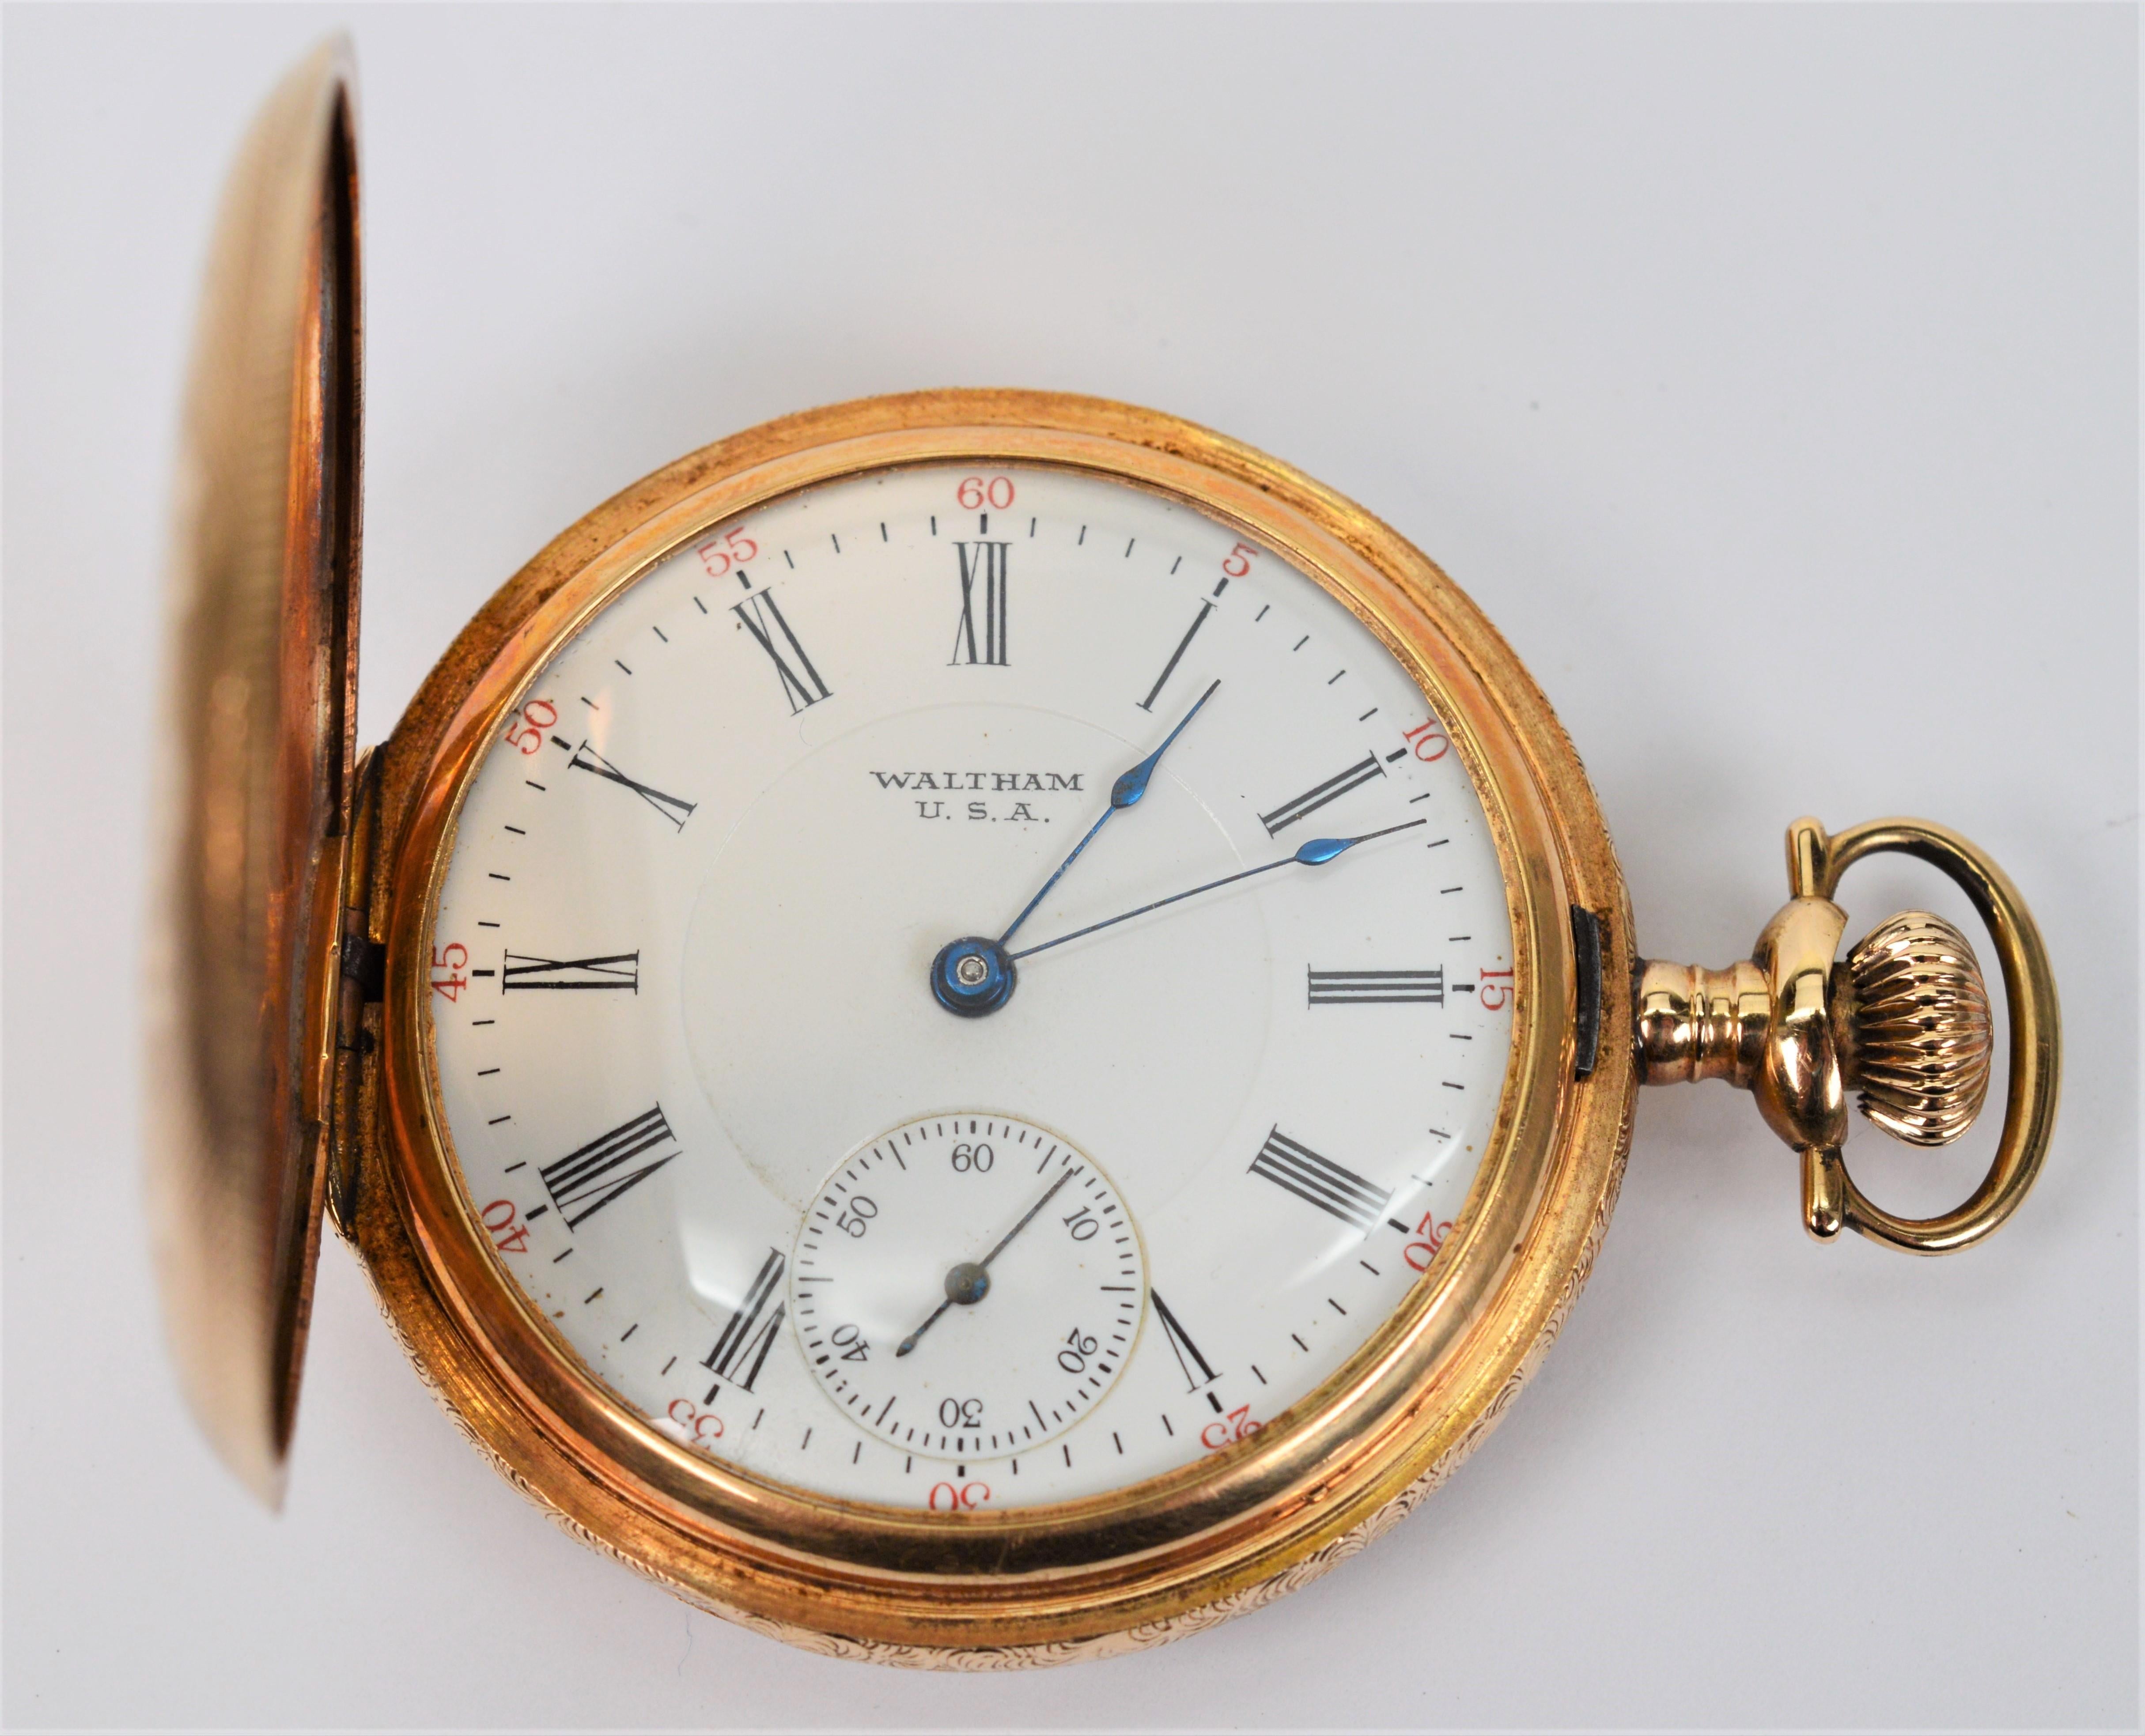 From American Waltham Watch Company, 14 karat yellow gold pocket watch Bartlett Grade model no. 1908 in size 16 with Serial Number 2303387.
Has seventeen jeweled movement with a fancy acid etched Breguet church regulator mounted in a hand engraved